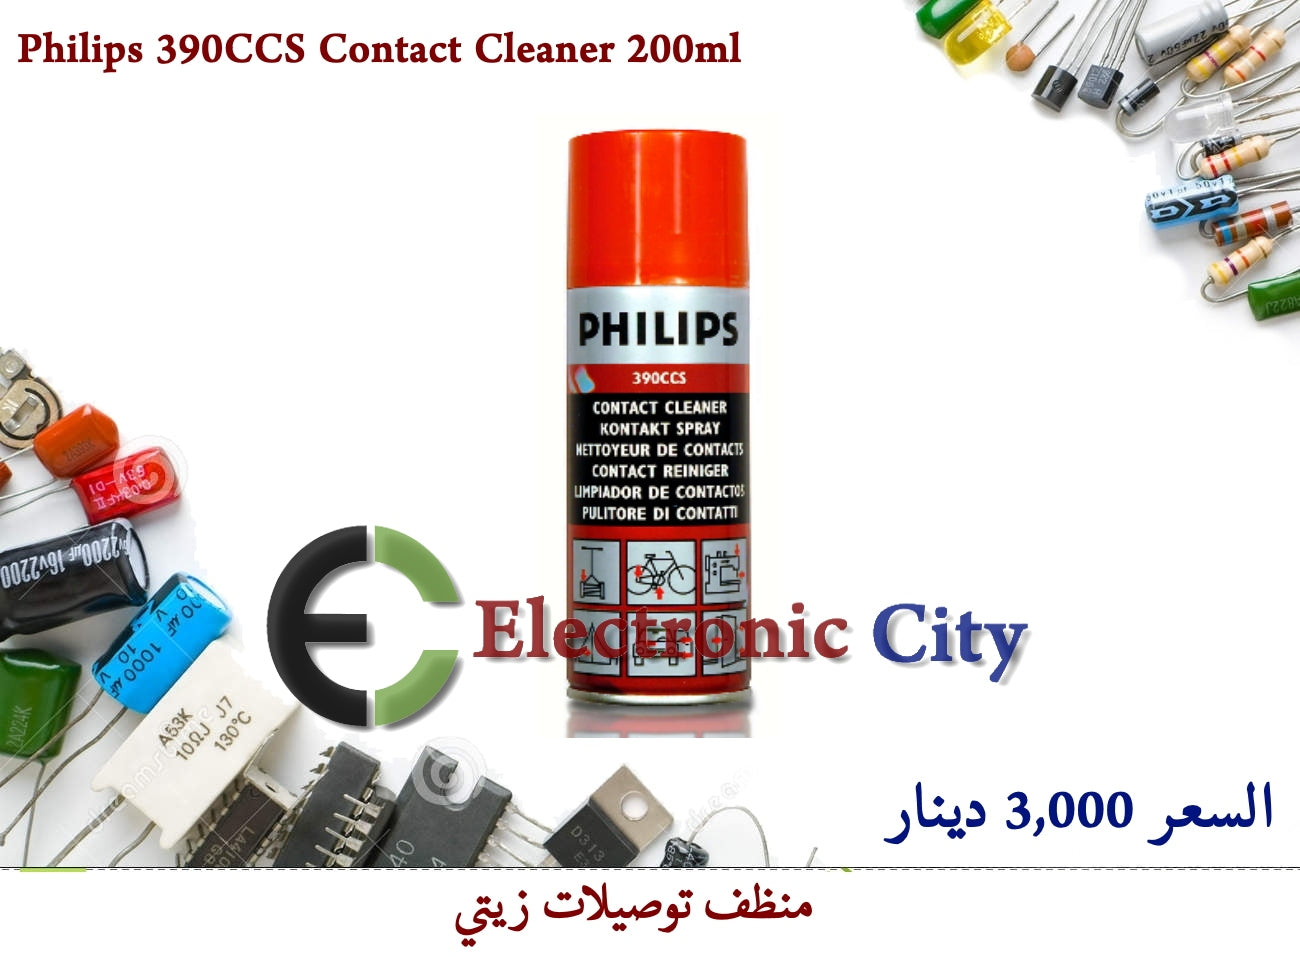 Philips 390CCS Contact Cleaner 200ml